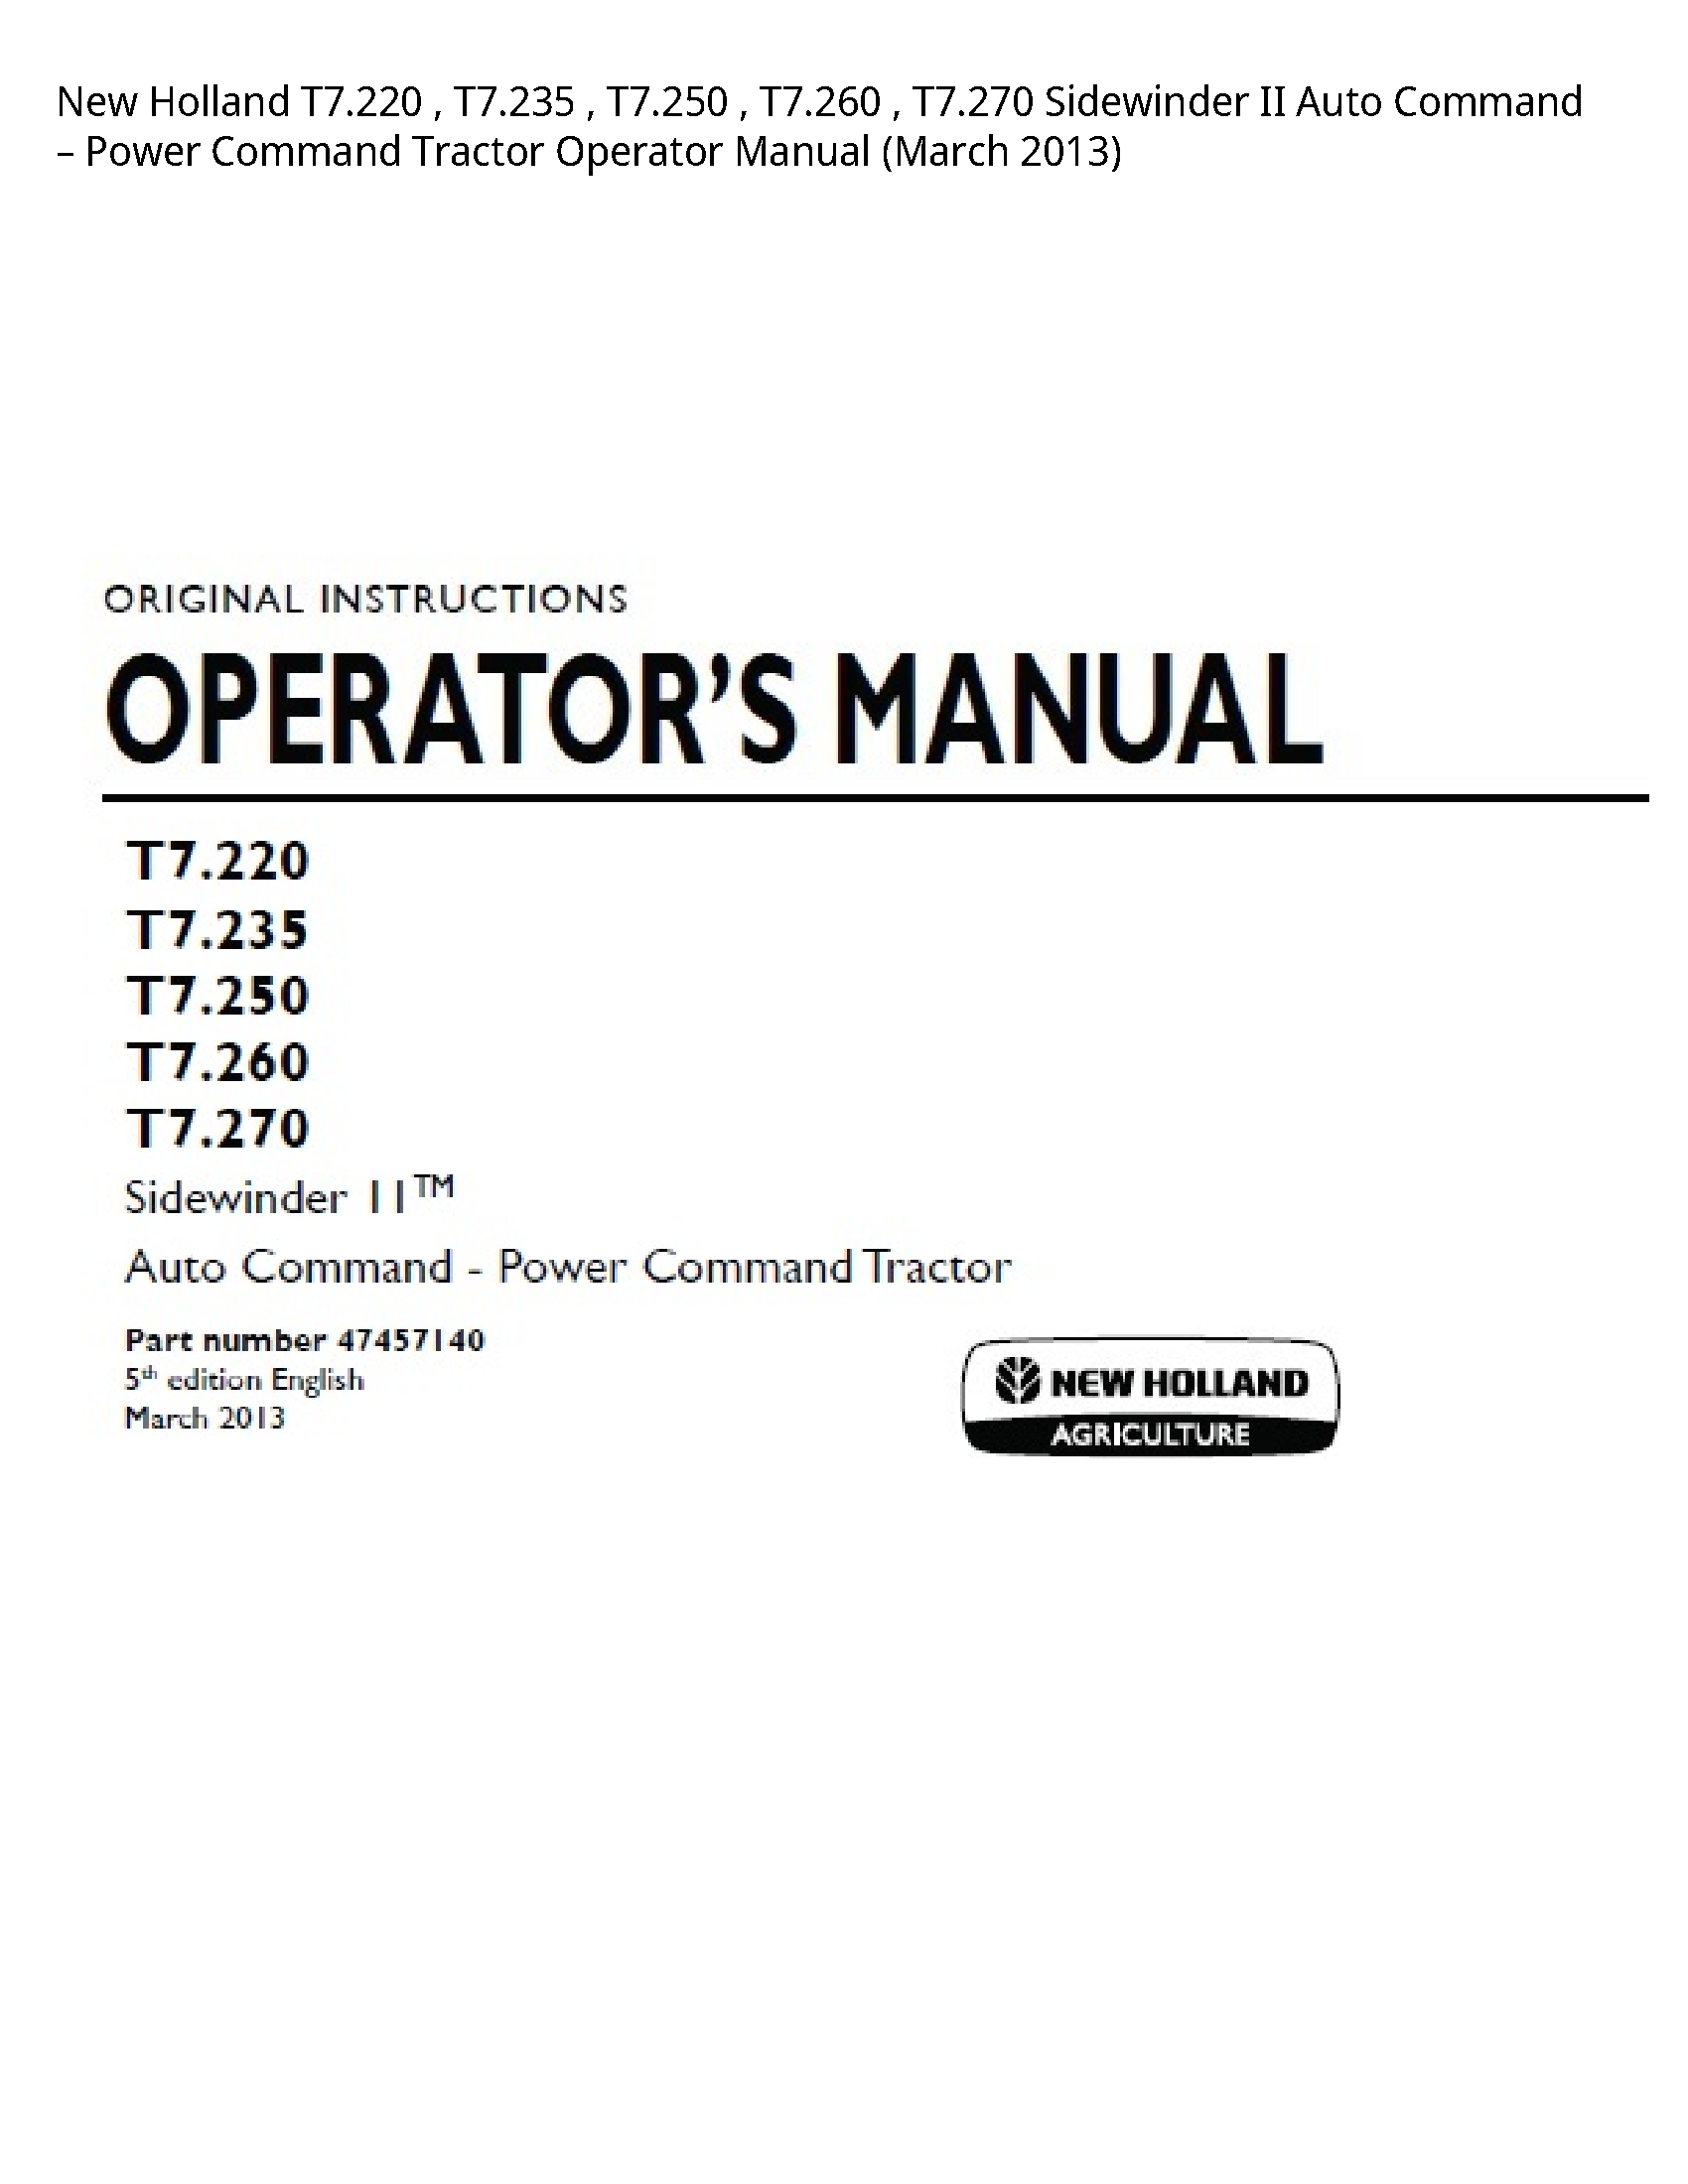 New Holland T7.220 Sidewinder II Auto Command Power Command Tractor Operator manual